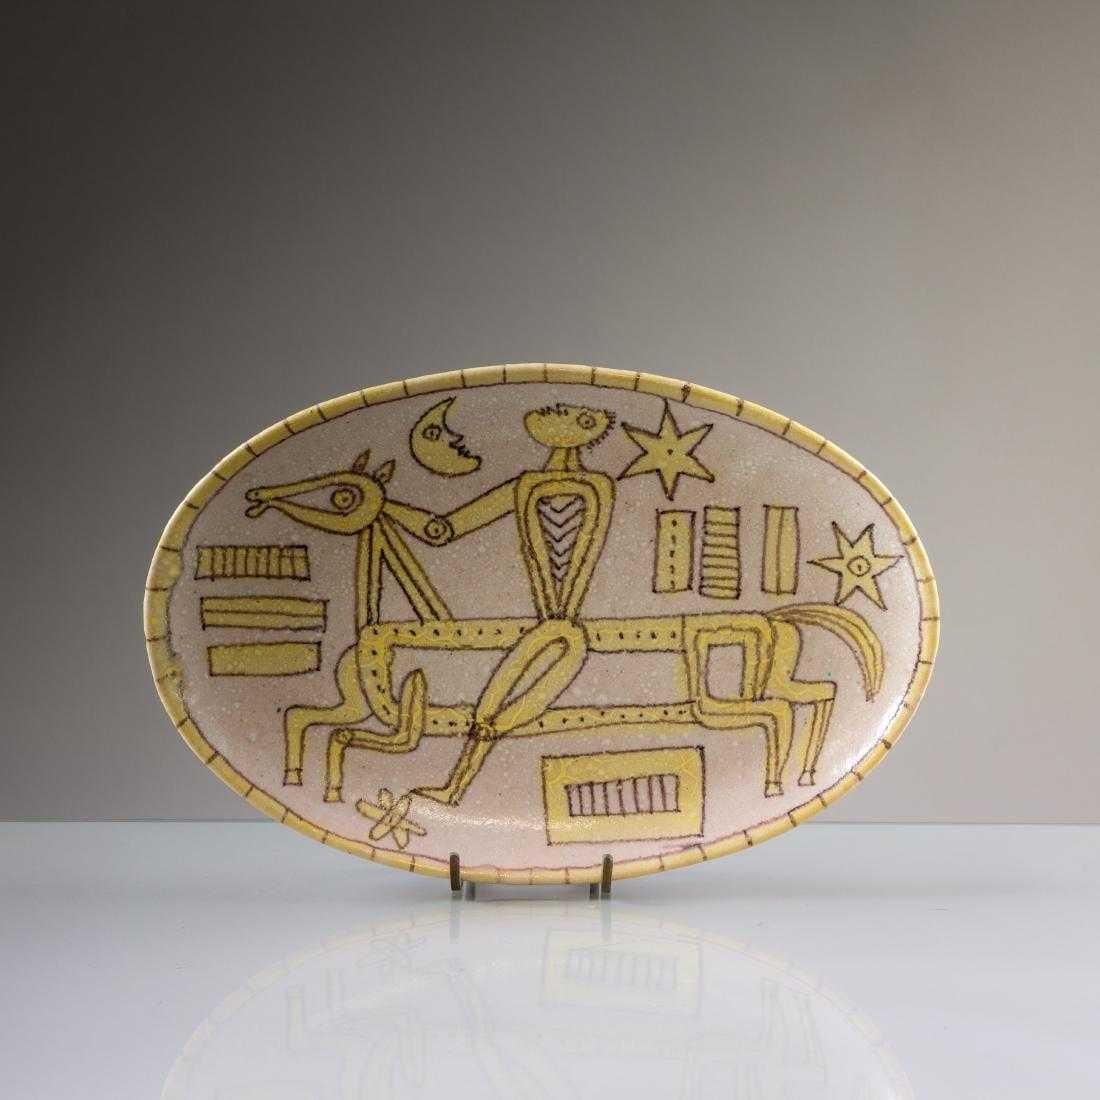 A large stoneware platter or charger in oval shape by Guido Gambon Italy circa 1960s. Beautifully covered in a white lava-like textured glaze and decorated with a yellow and black outlined figure riding a horse under the moon and the star. The